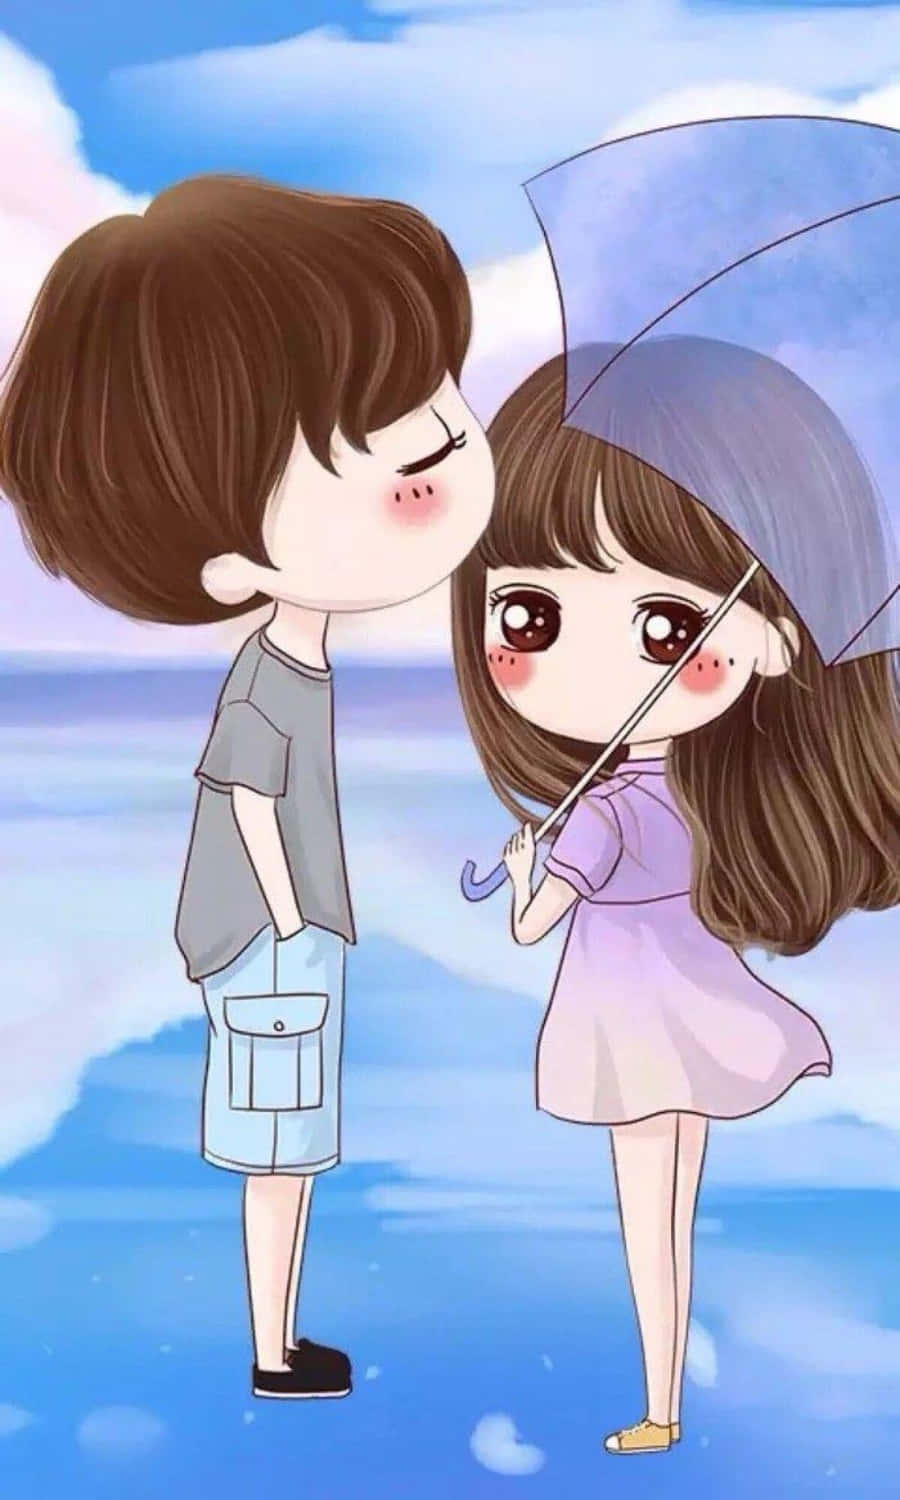 100+] Love Cute Couple Wallpapers